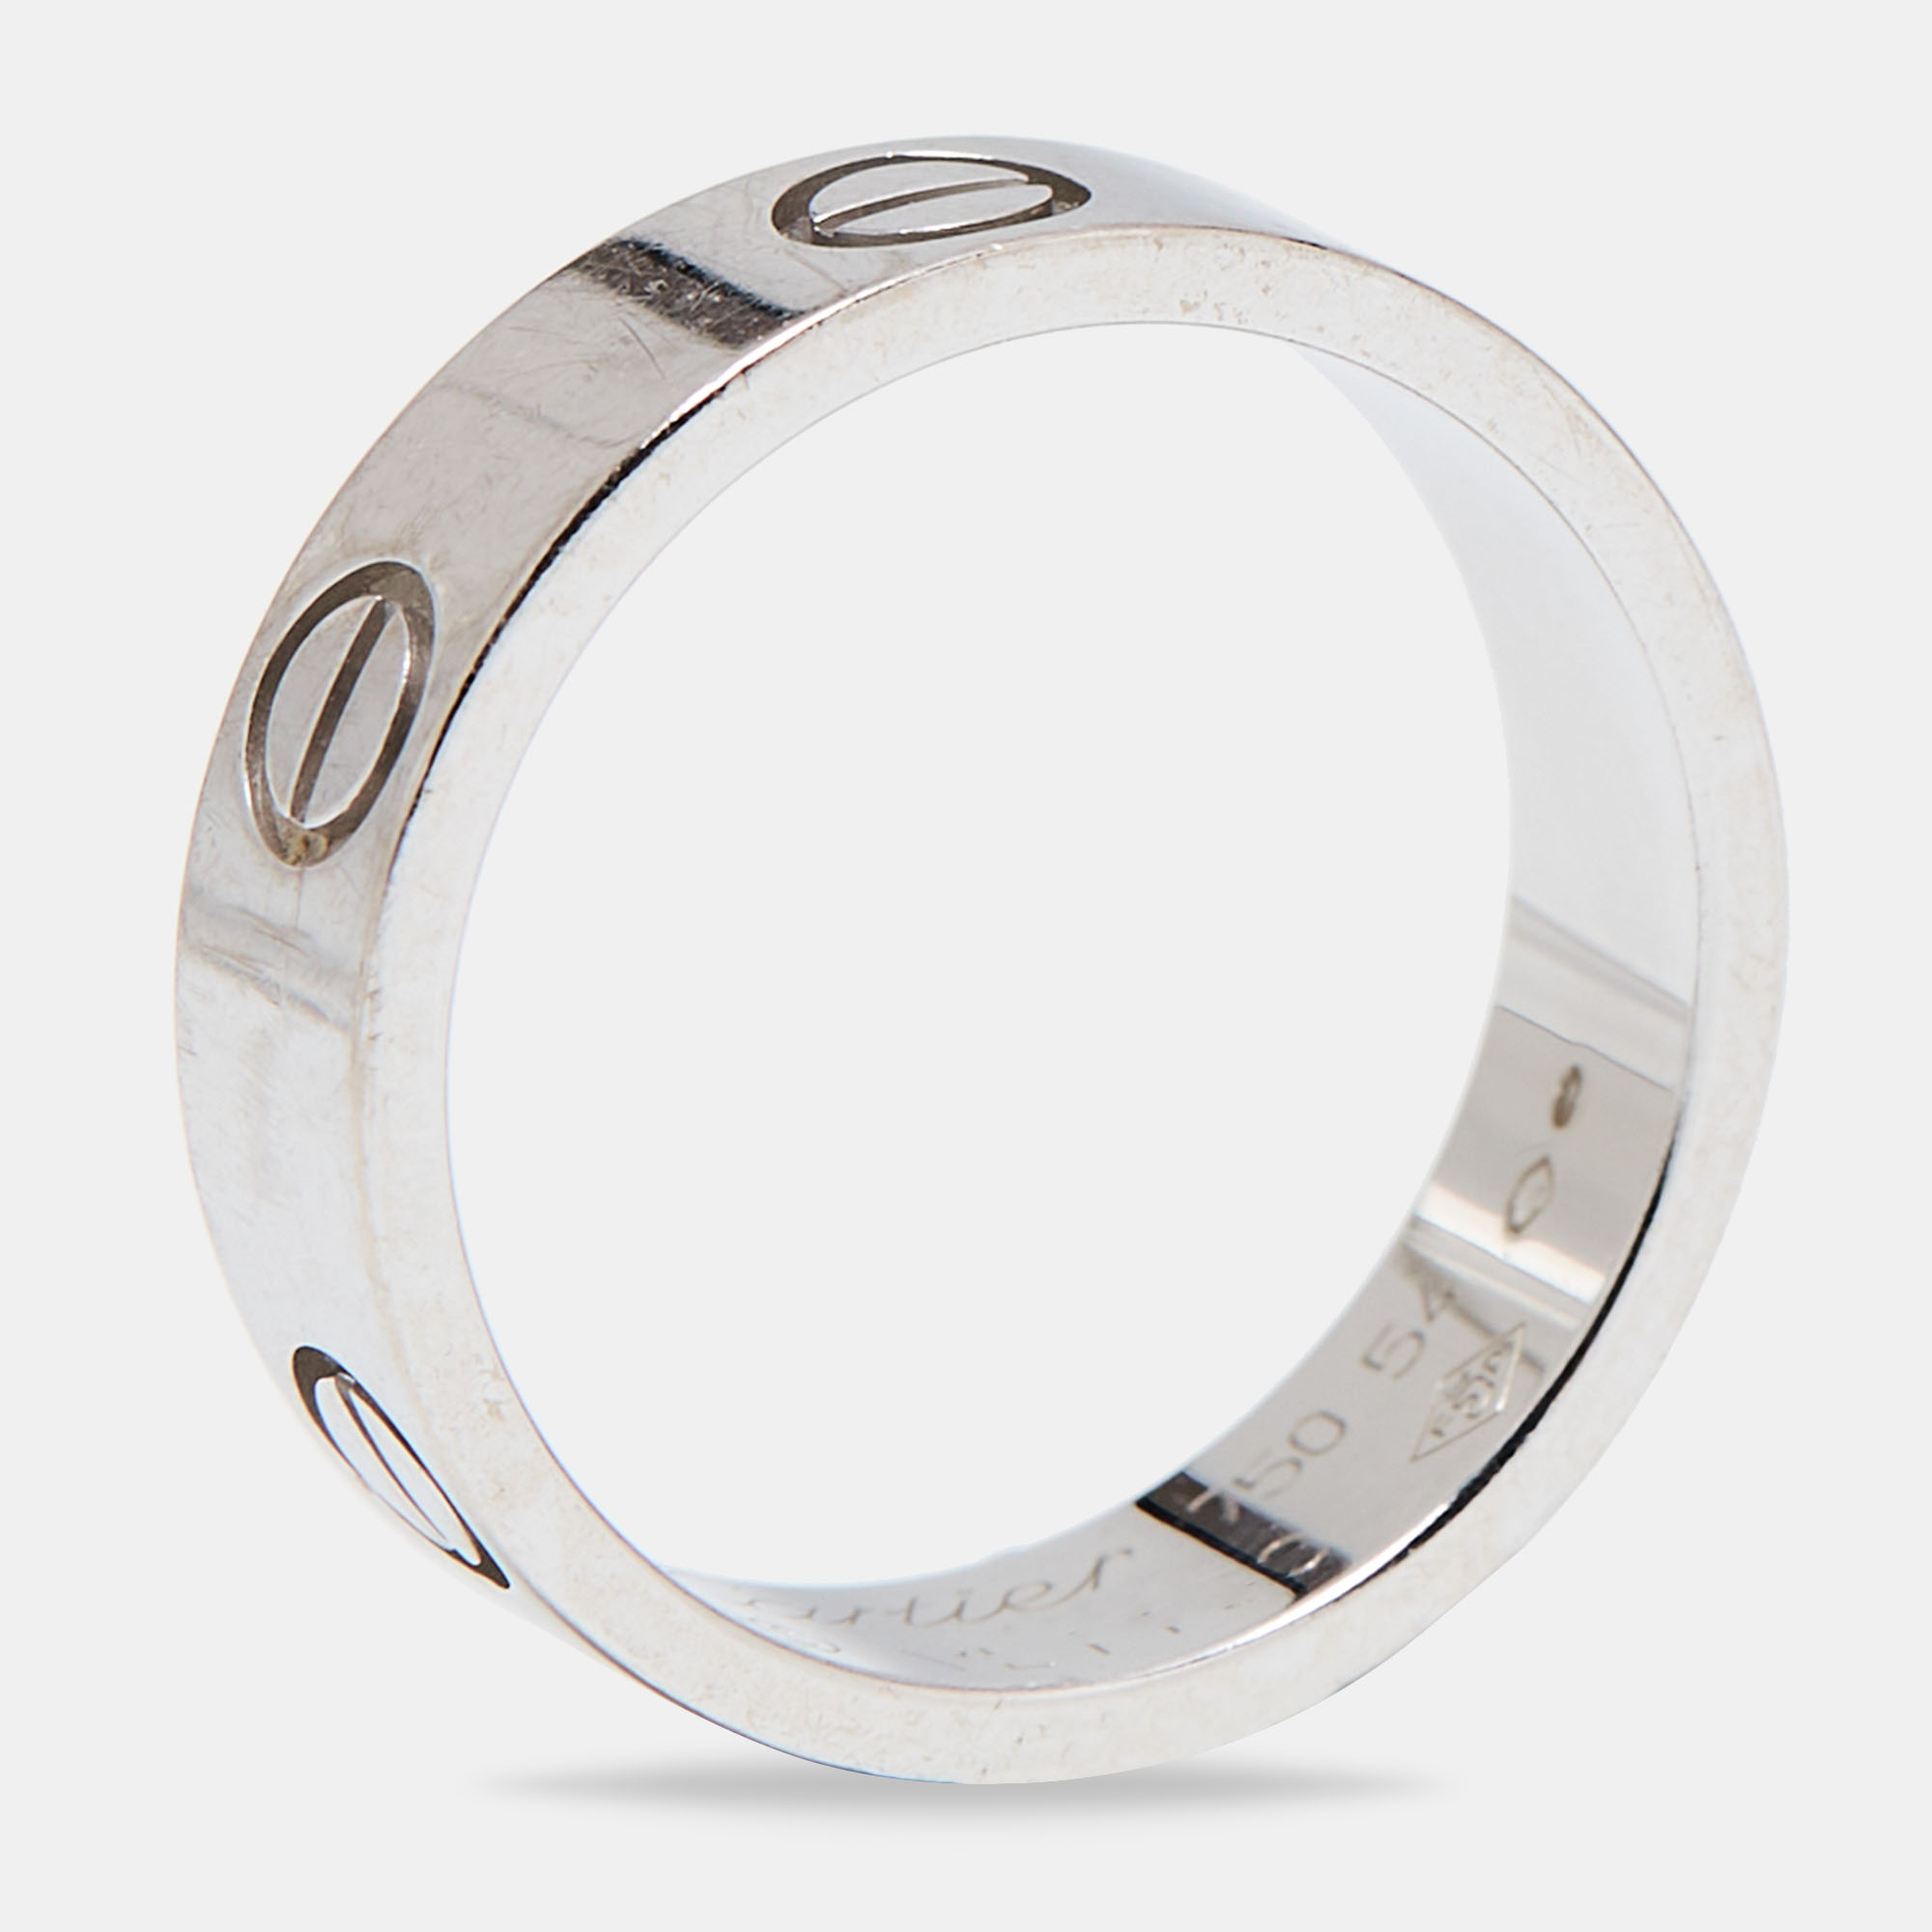 Cartier Love 18k White Gold Ring Size 54